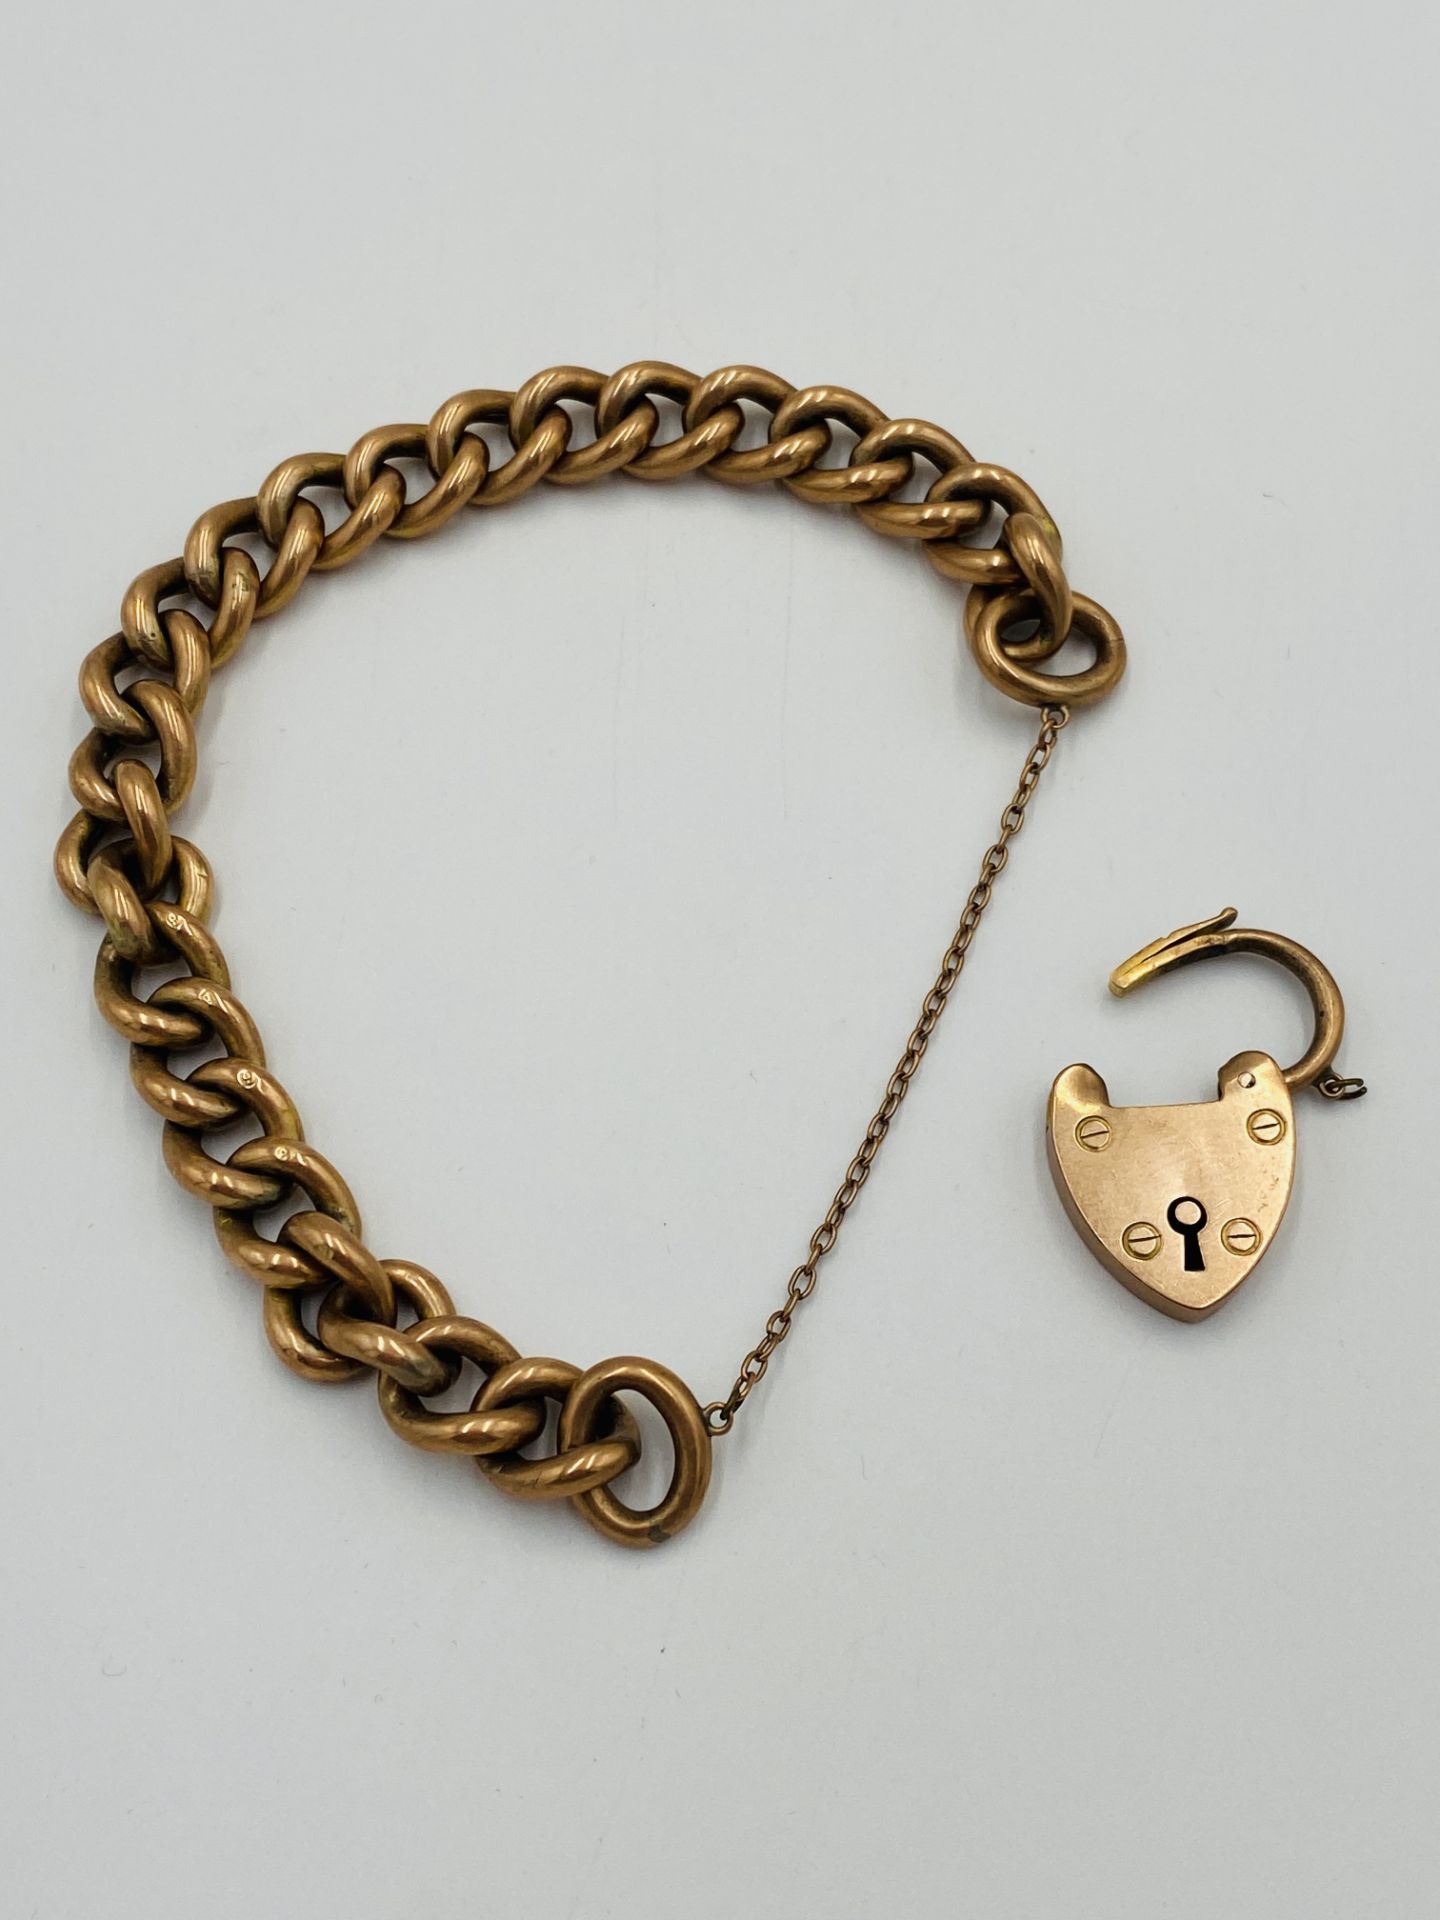 9ct gold bracelet with 9ct gold padlock charm